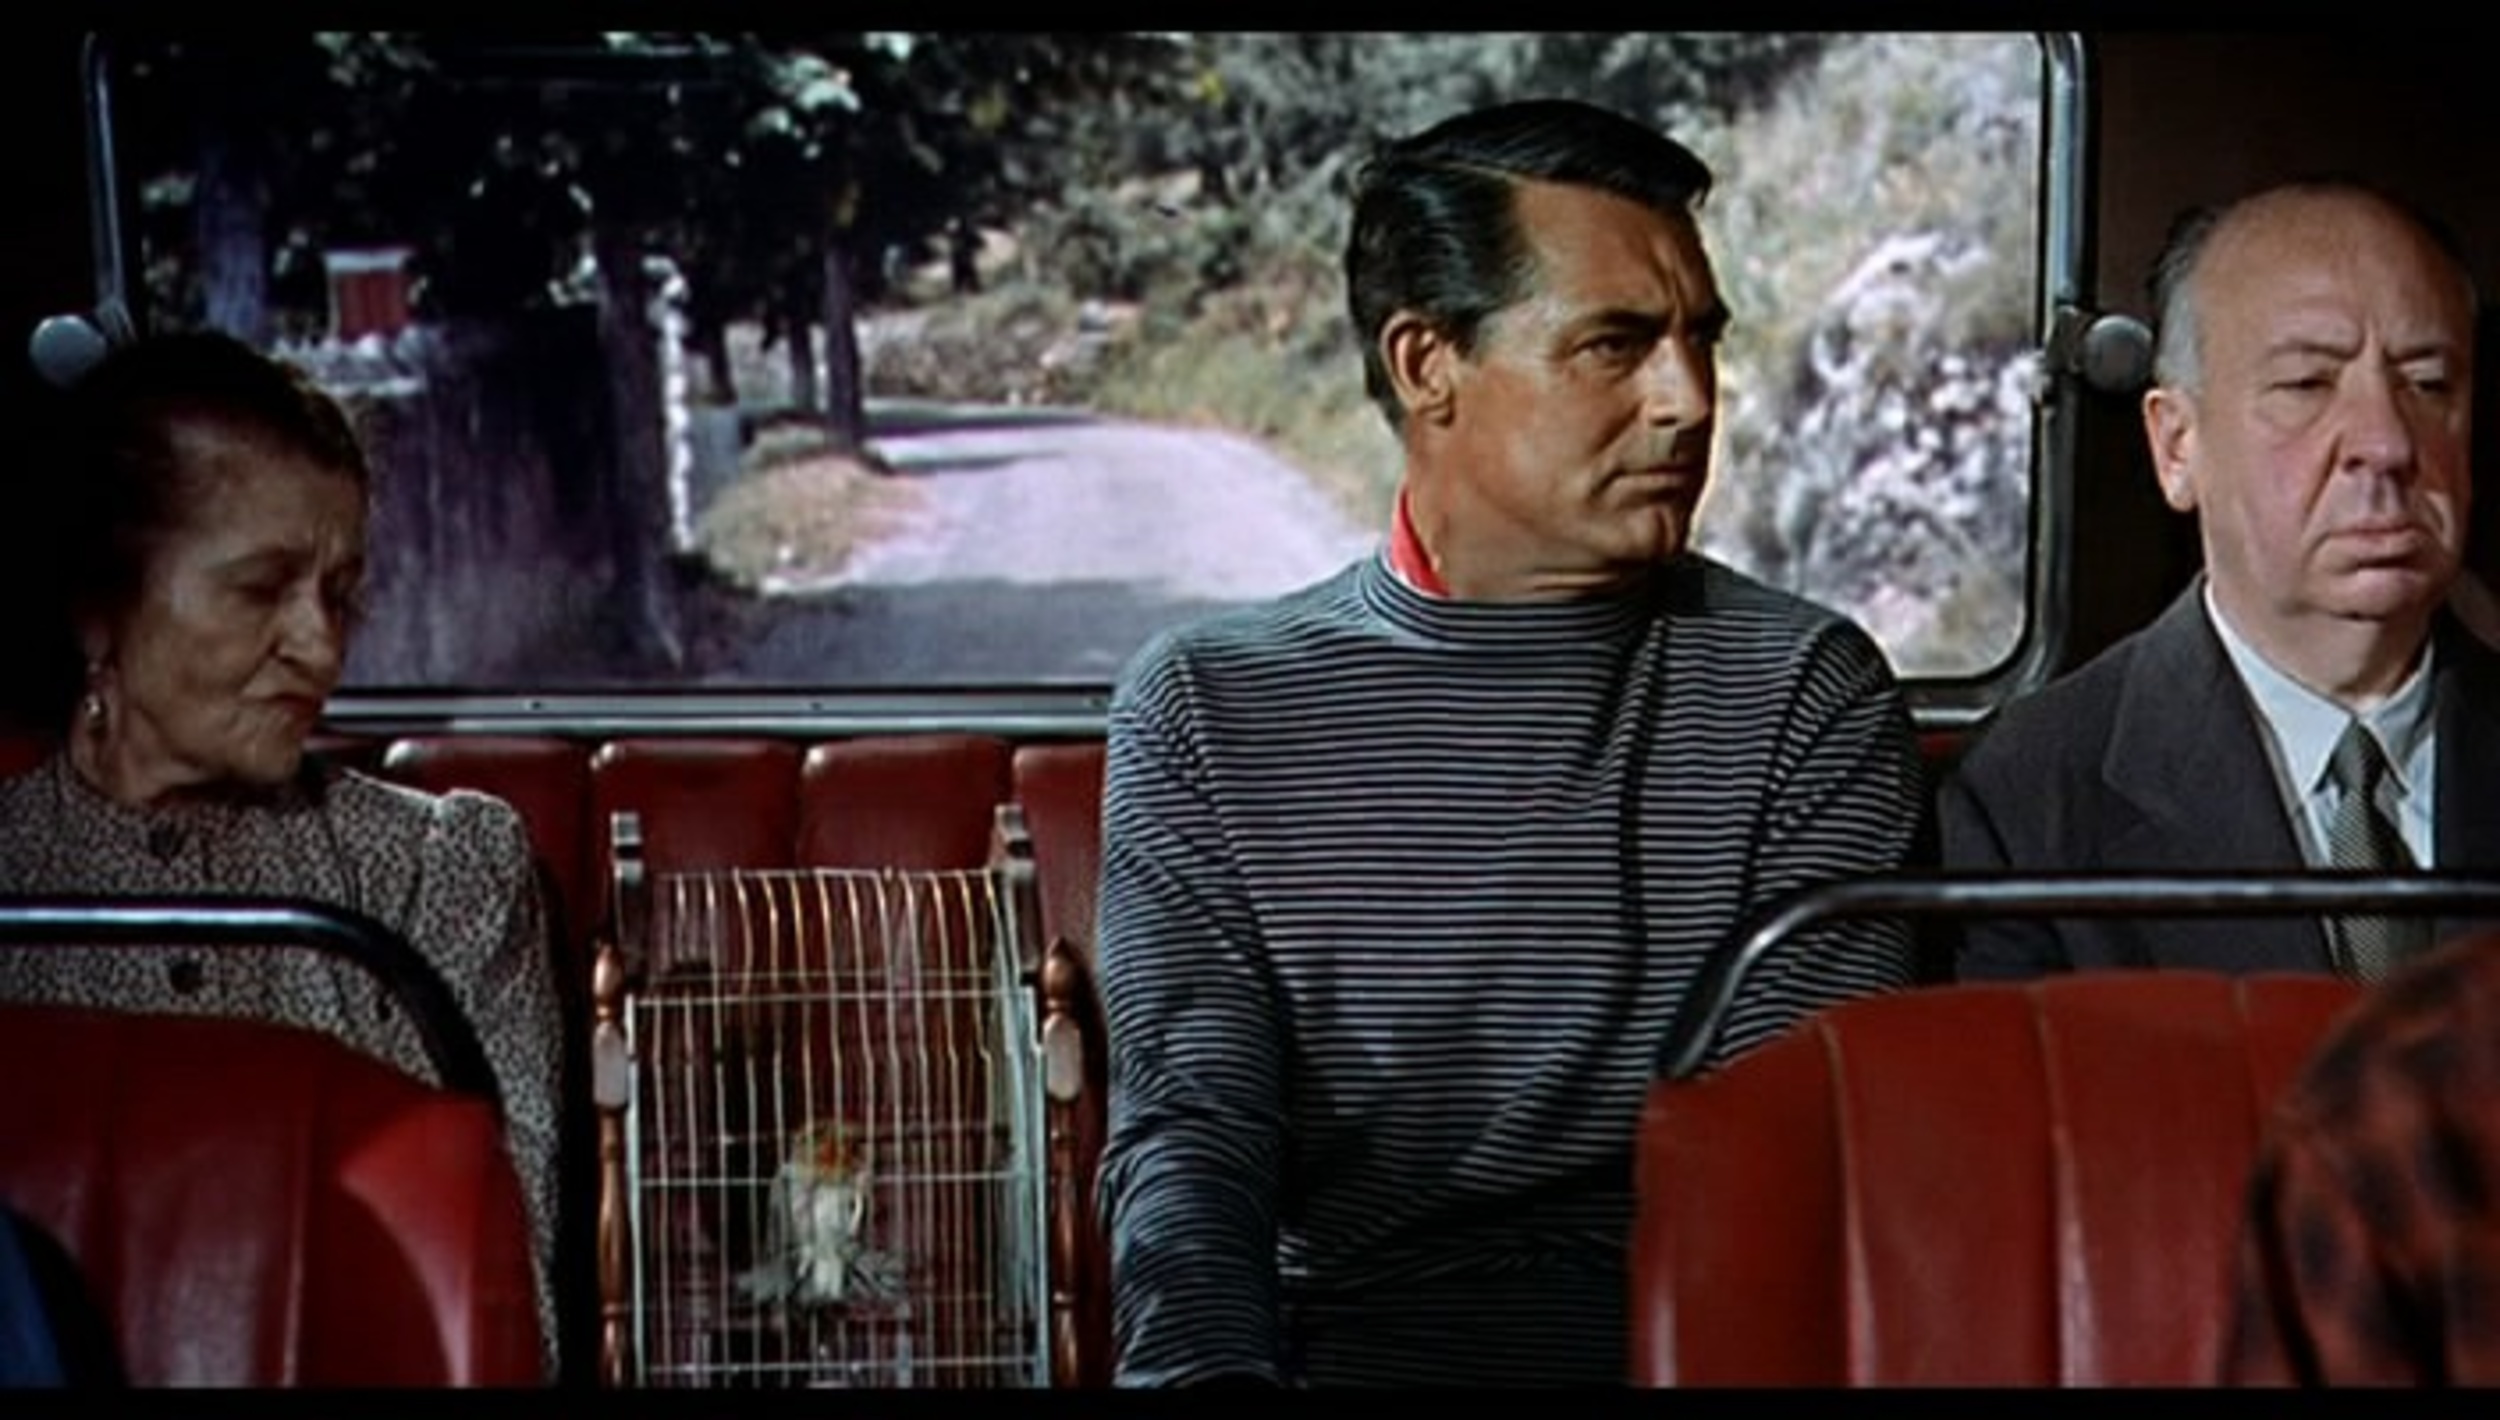 <p>By 1955 Hitchcock’s cameos were clearly a “thing.” In “To Catch a Thief” the camera literally pans over to show Hitch just sitting on a bus next to Cary Grant. On the other side of Grant, by the way, is a woman with a birdcage containing two birds.</p>